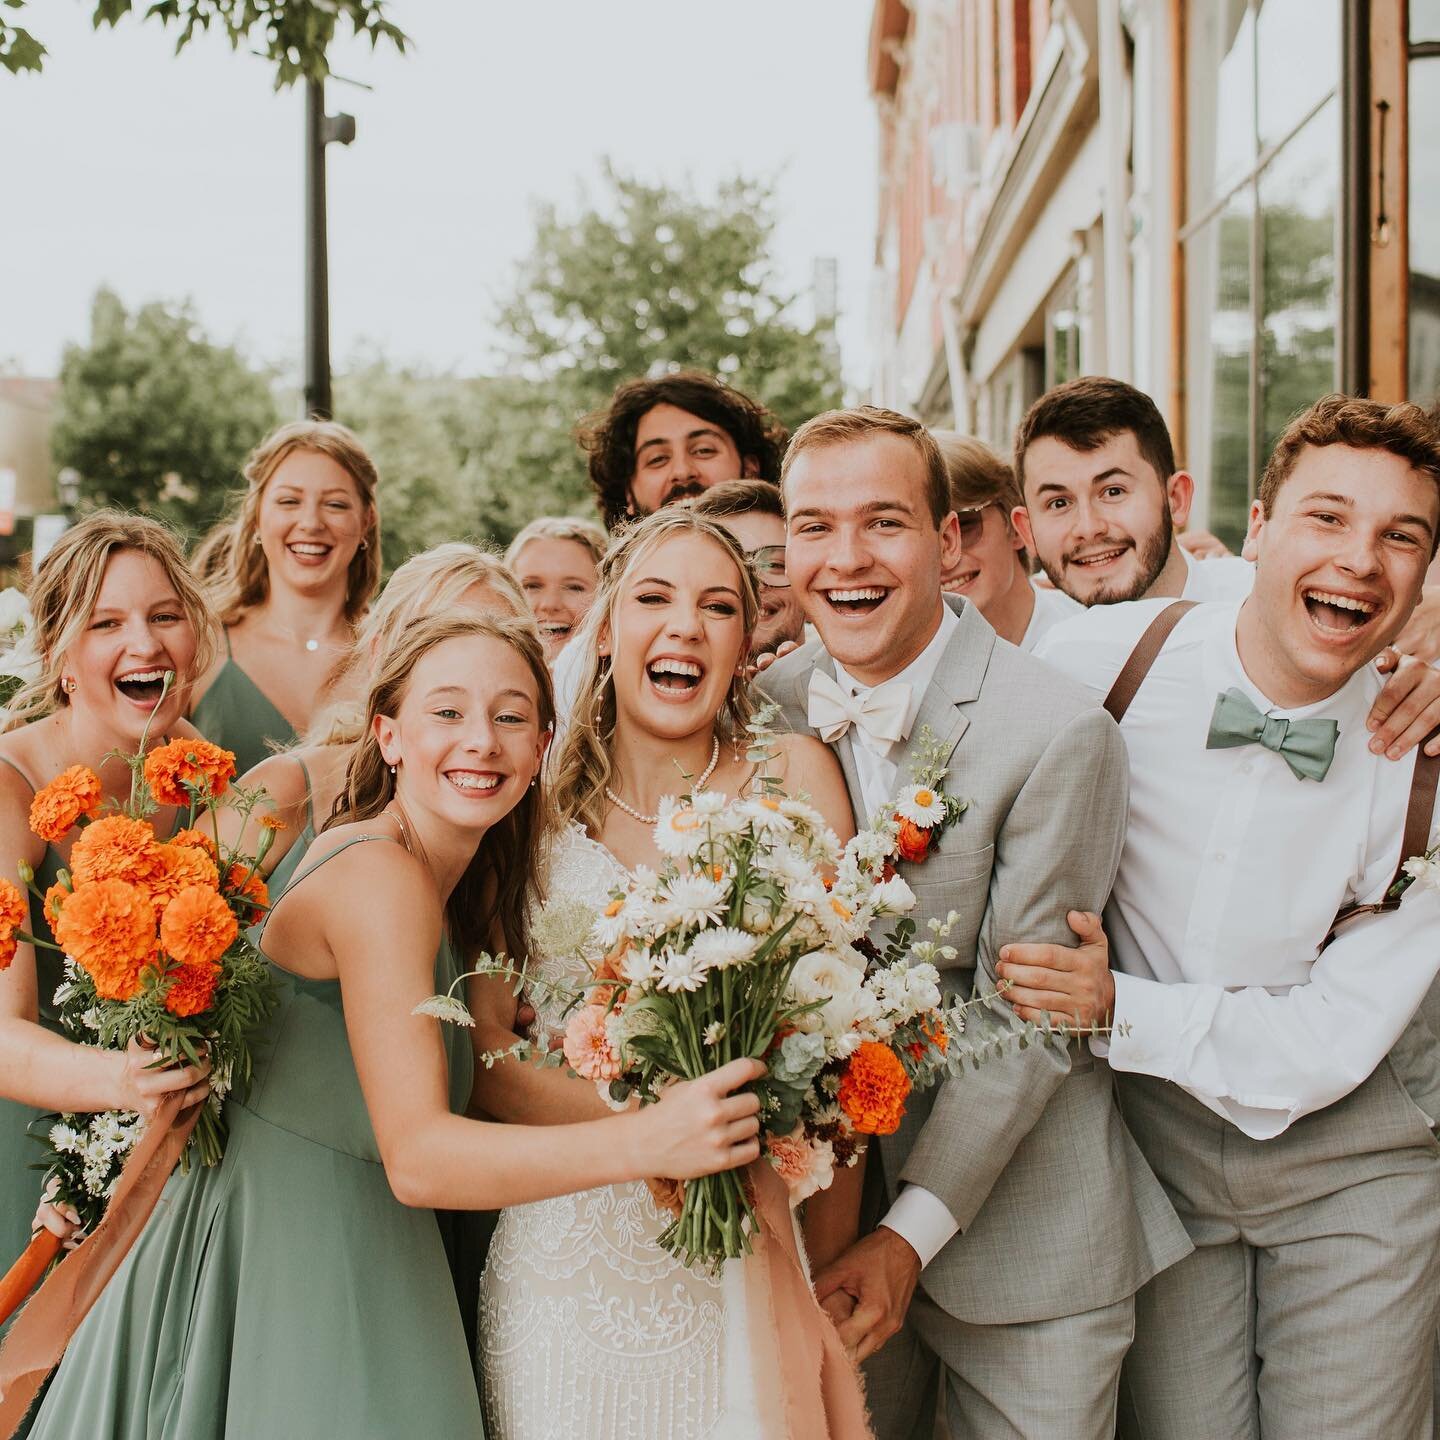 That just married &amp; hanging out with all your best friends feeling ✨